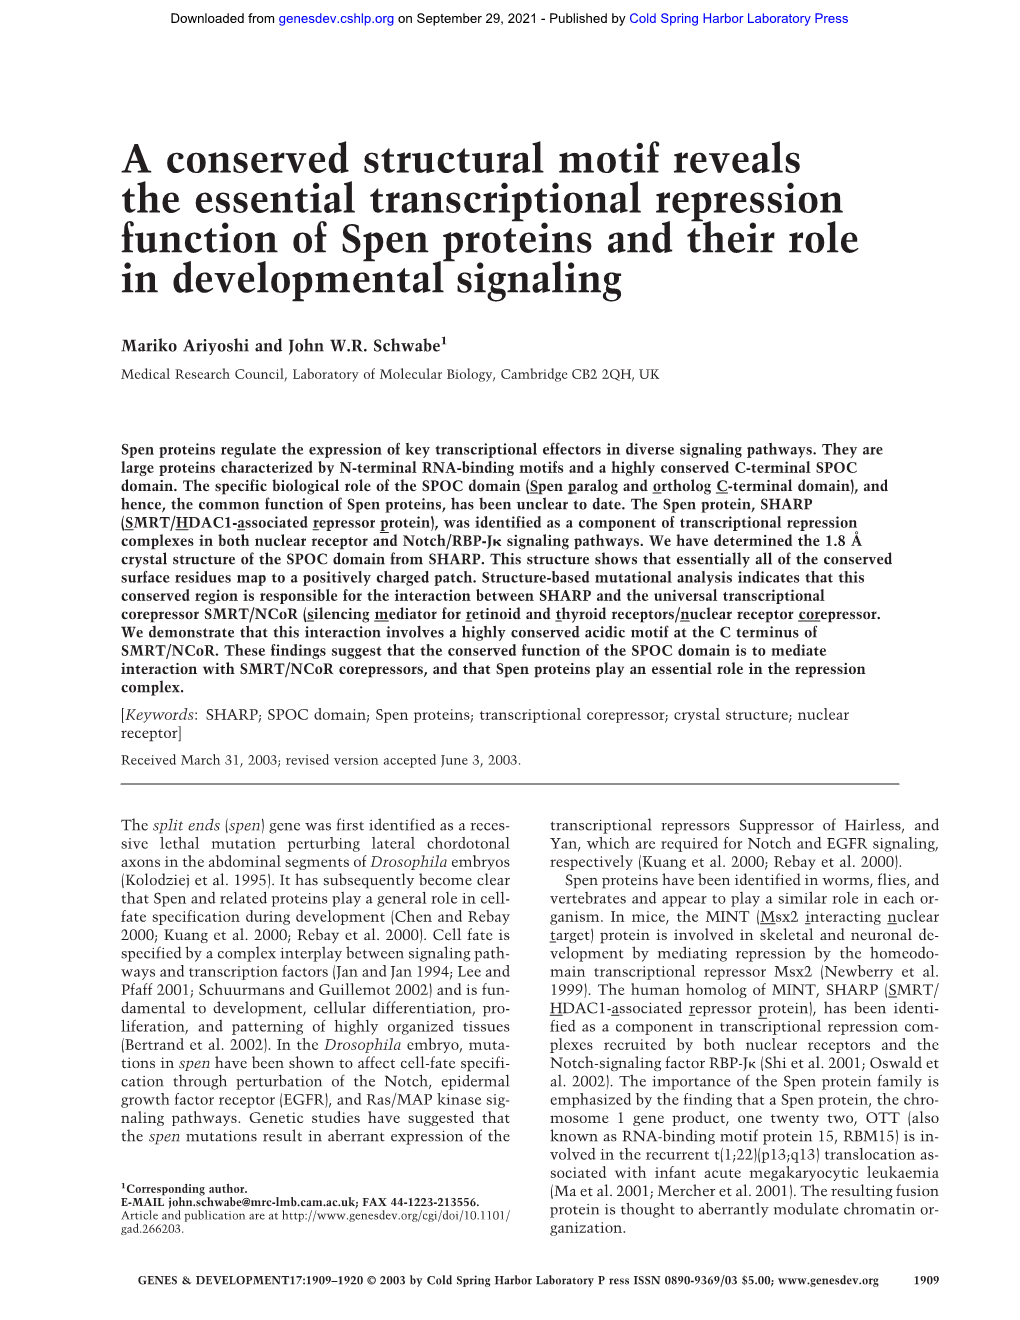 A Conserved Structural Motif Reveals the Essential Transcriptional Repression Function of Spen Proteins and Their Role in Developmental Signaling